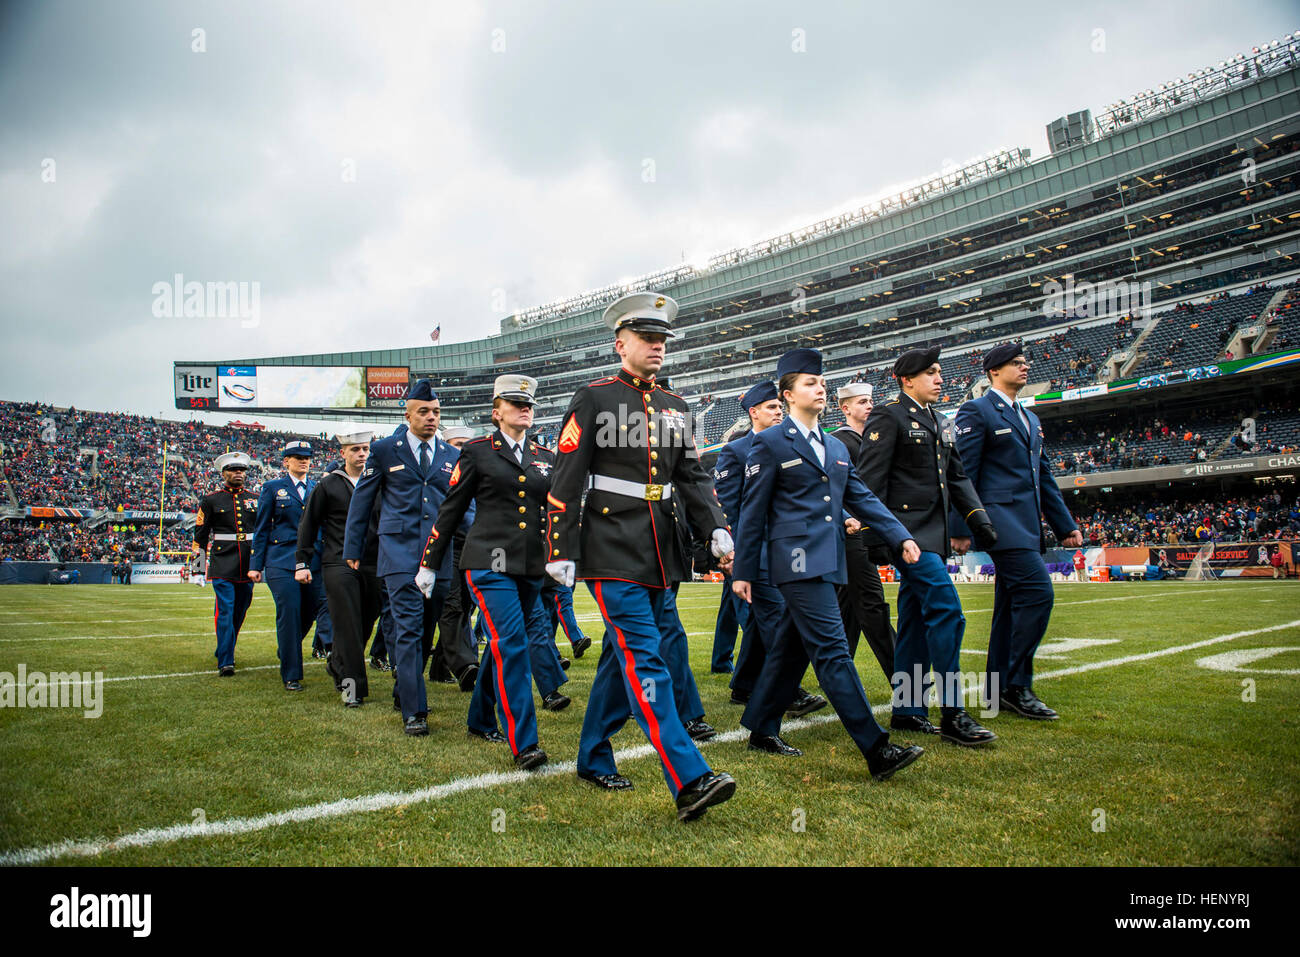 A group of service members march off the field after a reenlistment ceremony at Soldier Field during an NFL game designated to honor troops, Nov. 16., a few days after Veterans Day. (U.S. Army photo by Sgt. 1st Class Michel Sauret) Military service members honored during Chicago Bears game 141116-A-TI382-894 Stock Photo